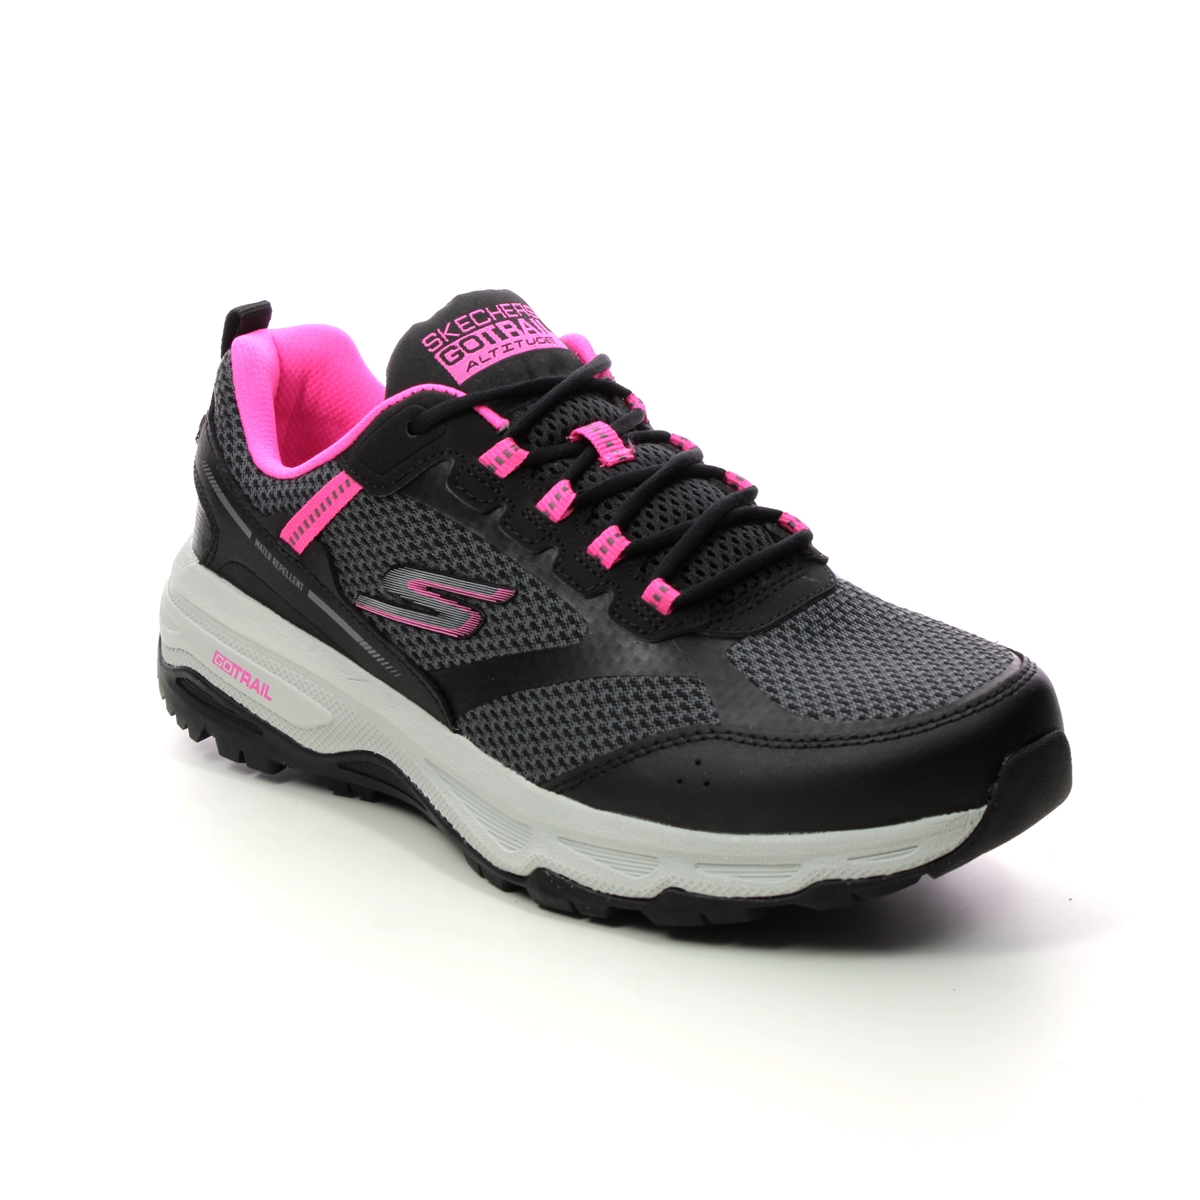 Skechers Go Run Trail Black Pink Womens Trainers 128200 In Size 6 In Plain Black Pink